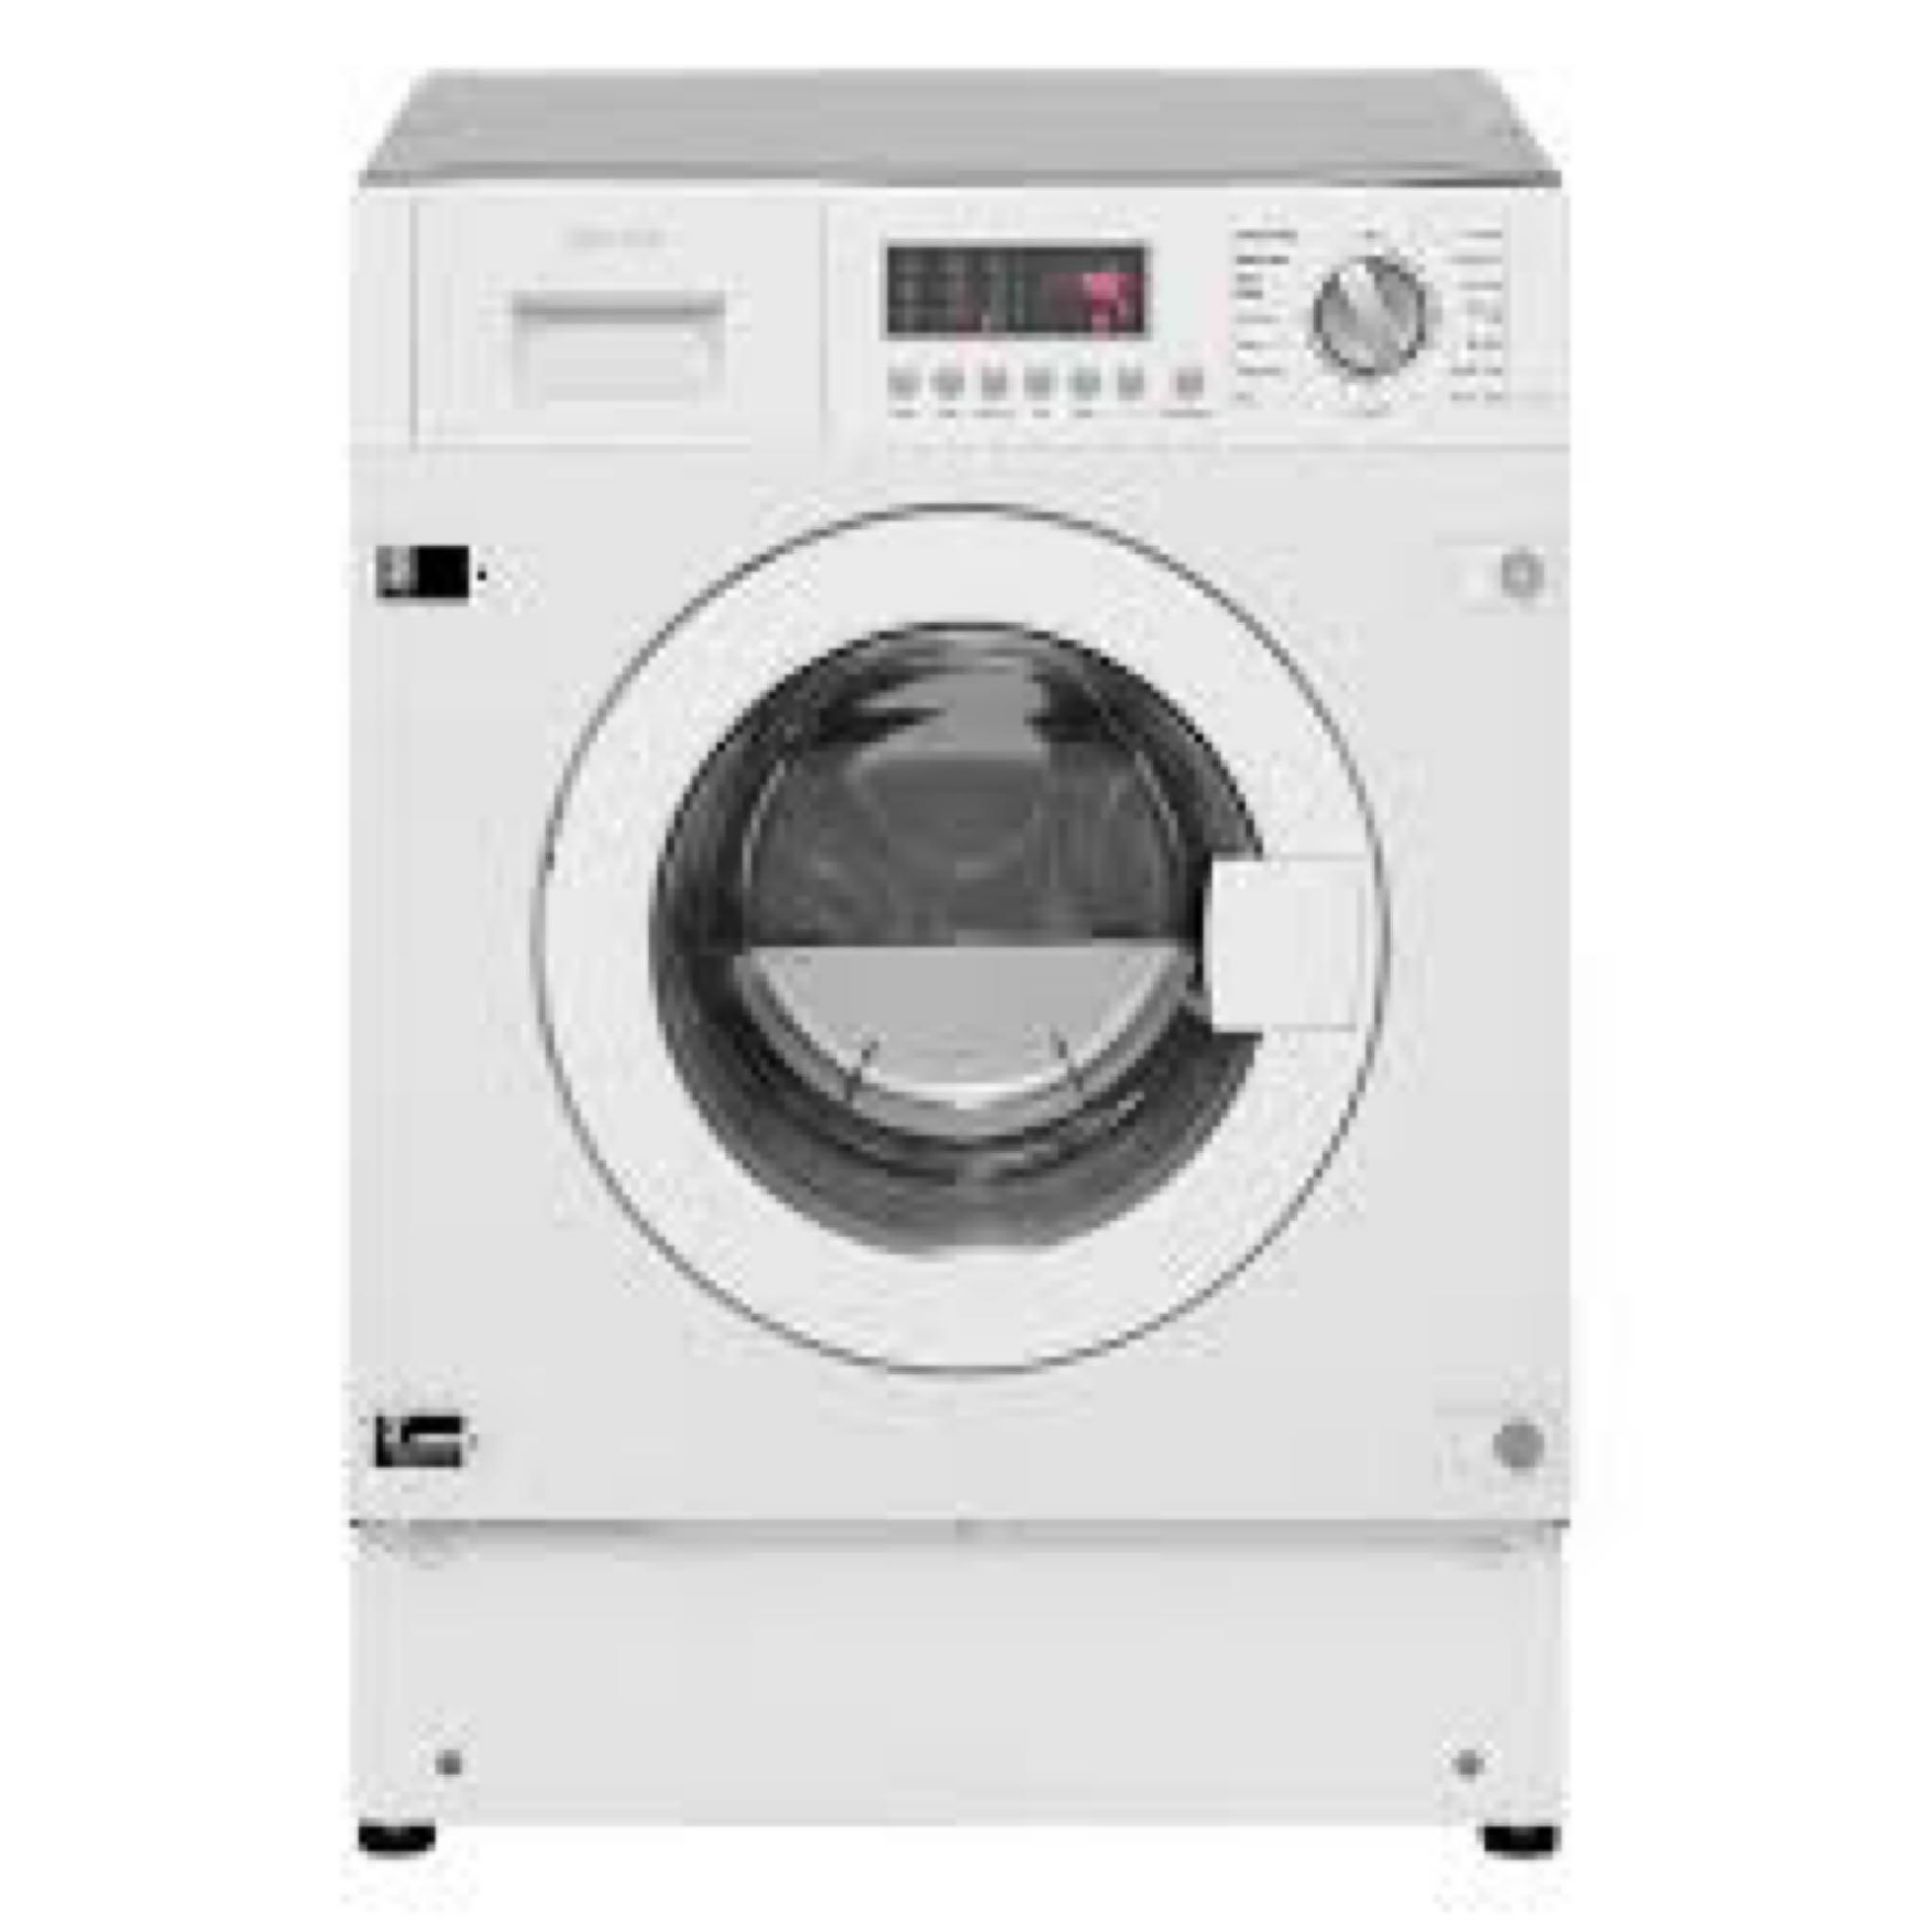 Rrp 1200 Lot To Contain 1 Unboxed Neff V654Ox1Gb Automatic Washer/Dryer